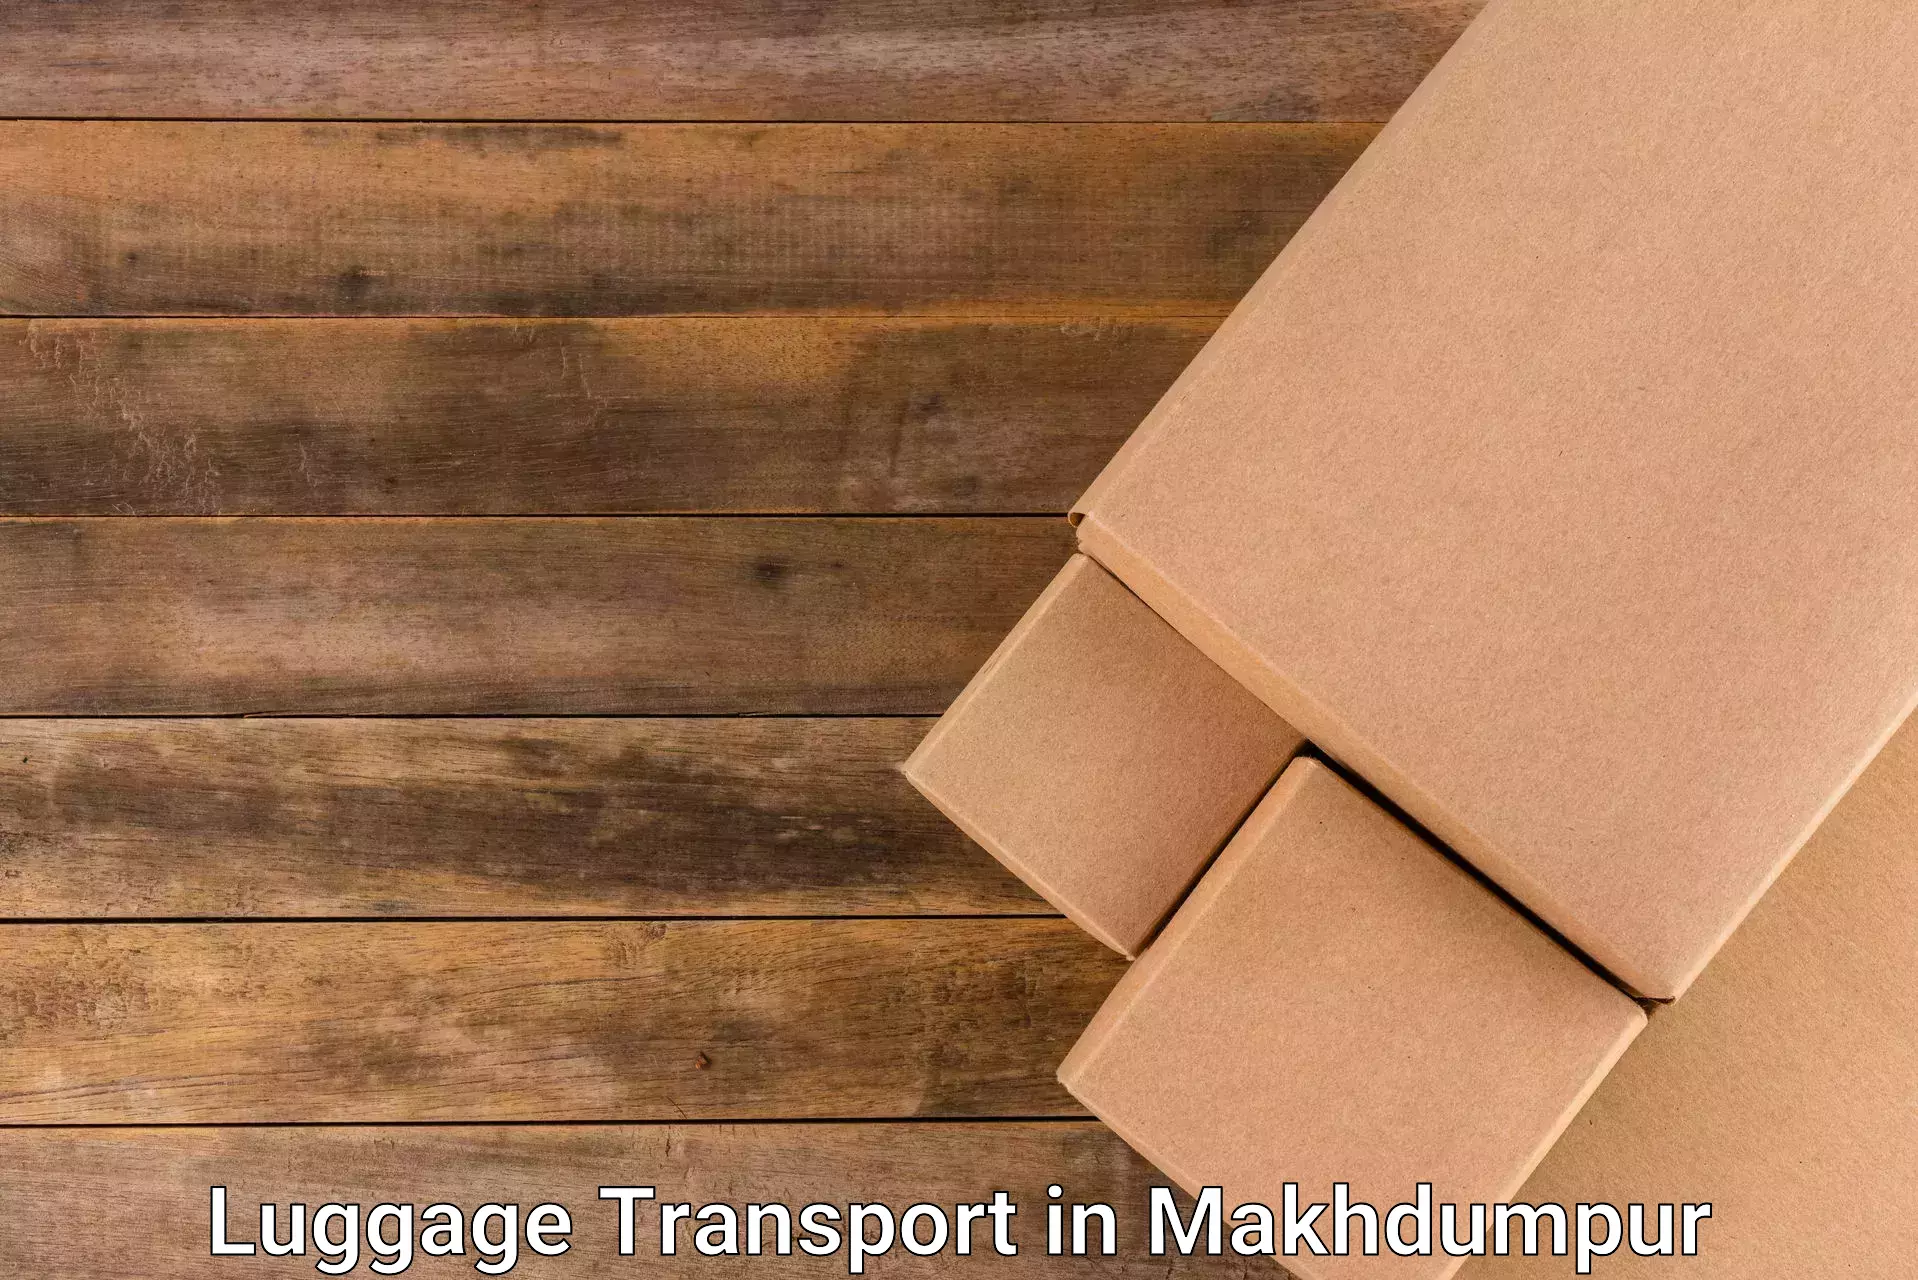 Nationwide luggage transport in Makhdumpur